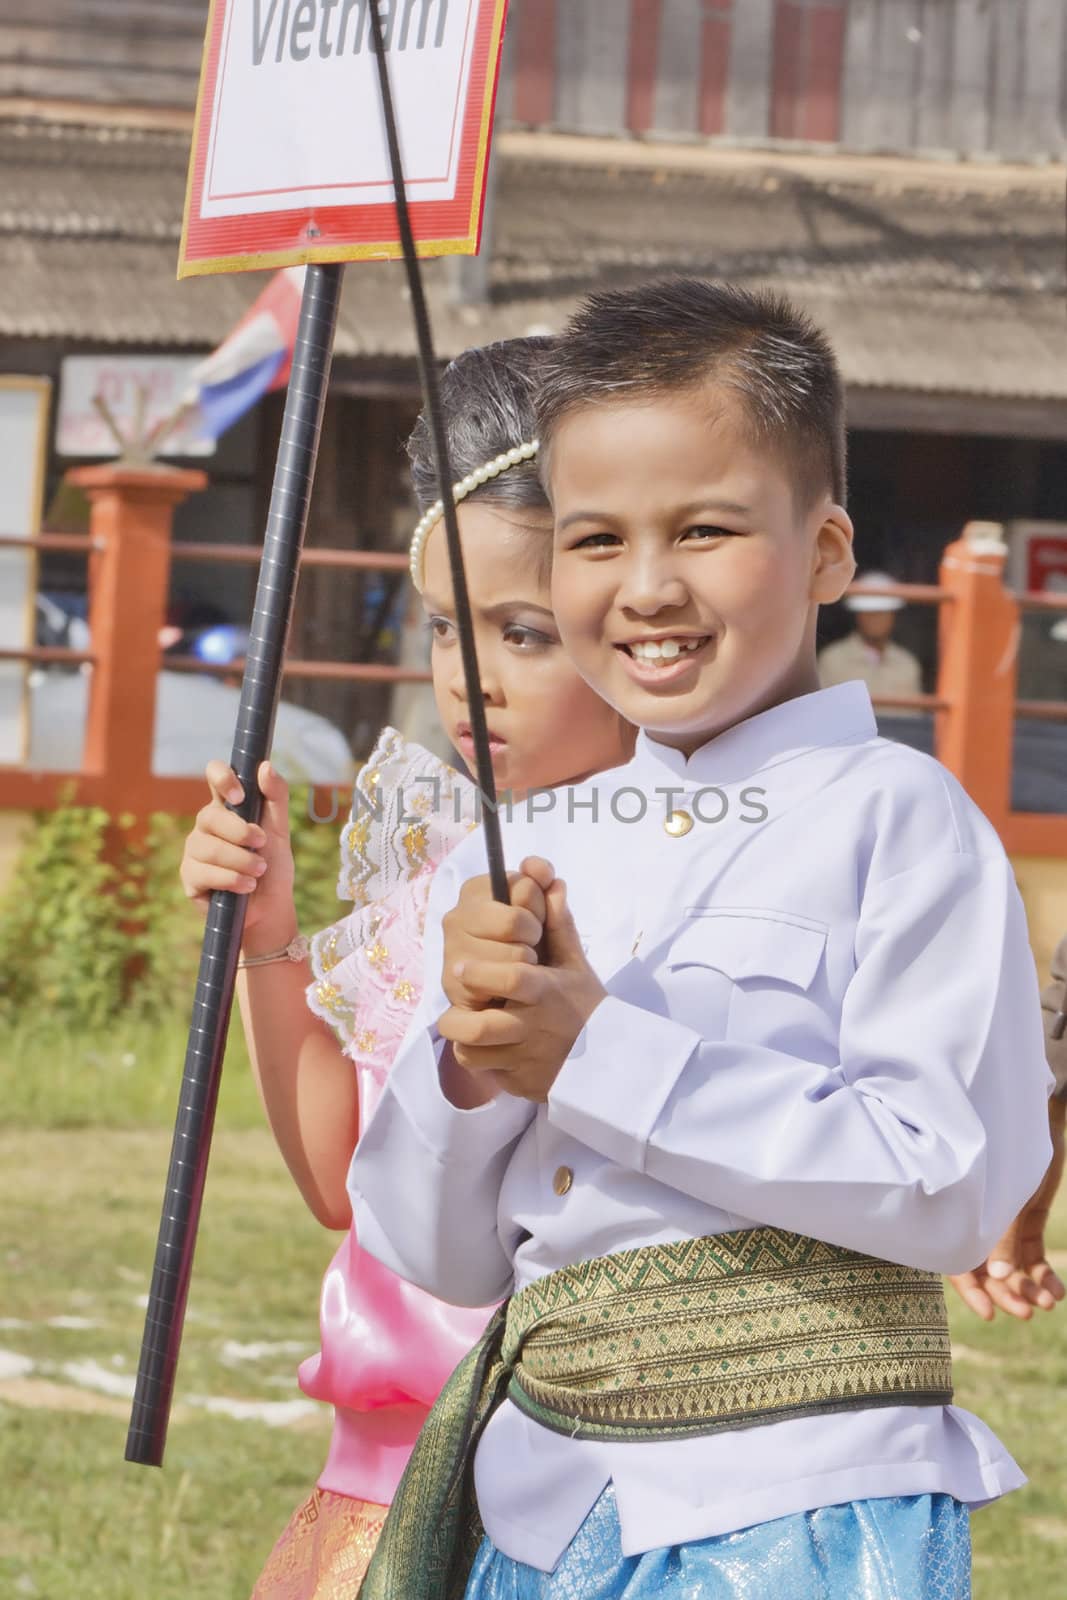 THAILAND - JULY 13: Thai students holding flag in Dokbual game school parade on July 13, 2012 in Suratthanee, Thailand.